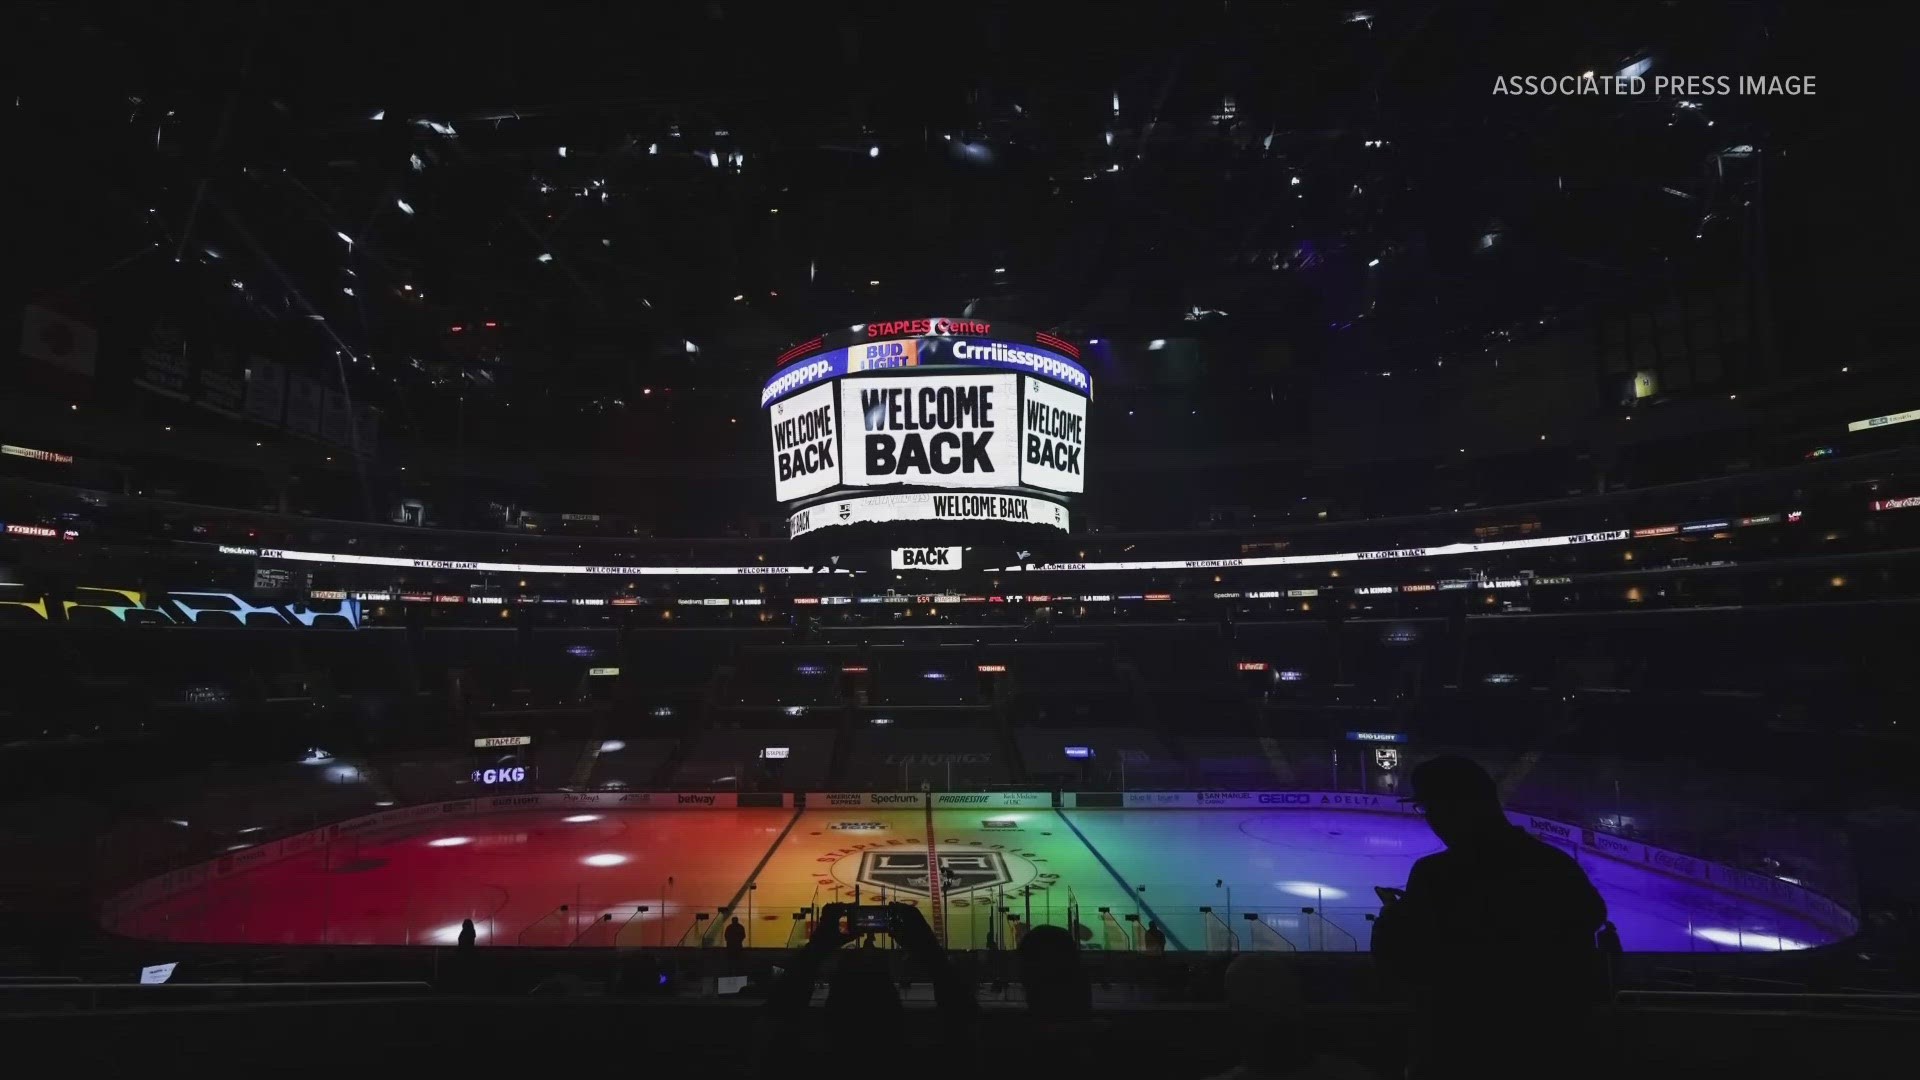 The Sabres will host their own Pride Night on Monday at KeyBank Center.